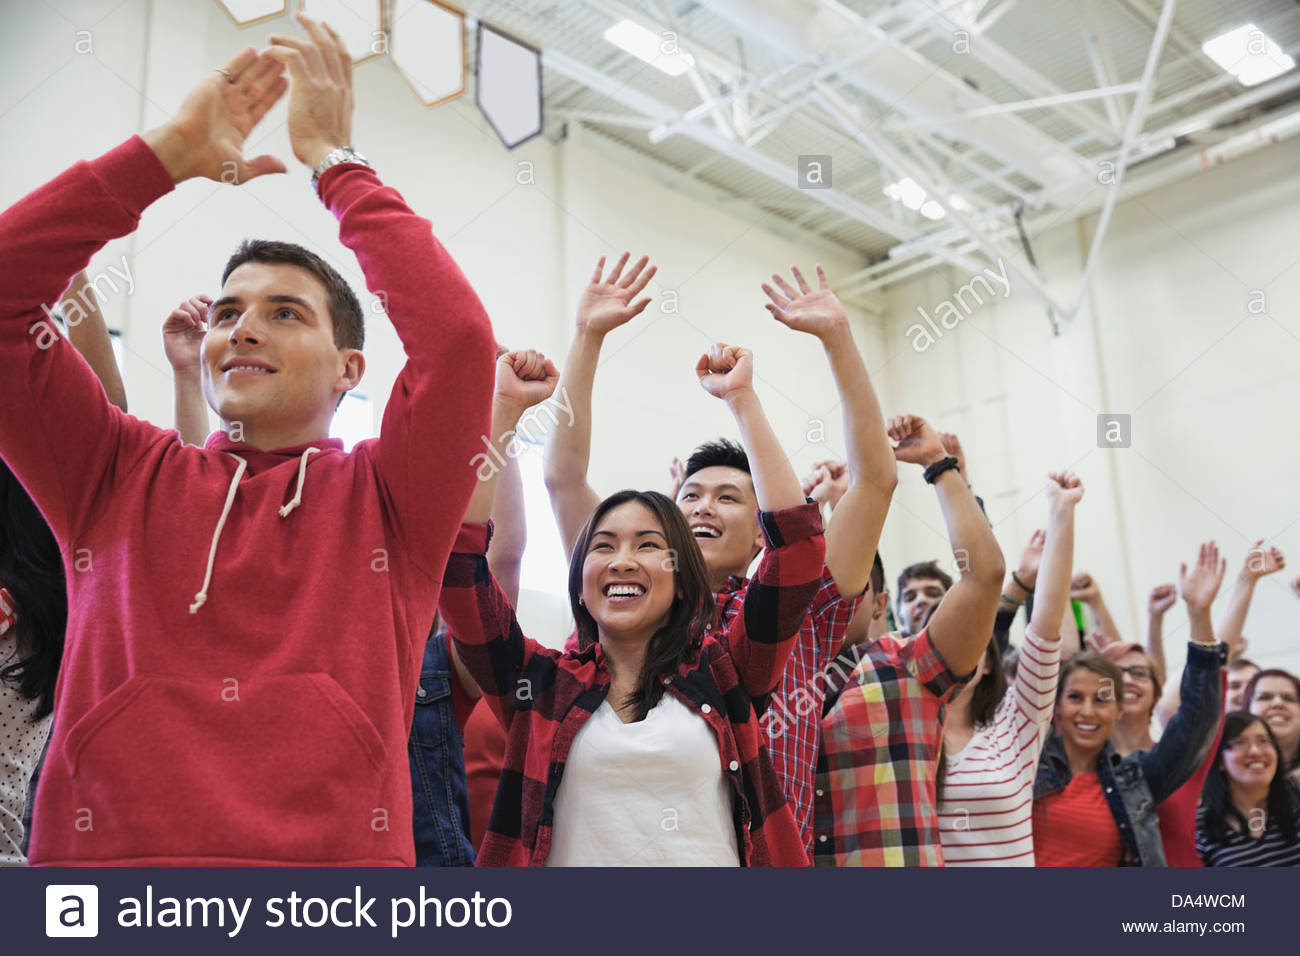 Grand groupe d'élèves cheering at college sporting event Banque D'Images